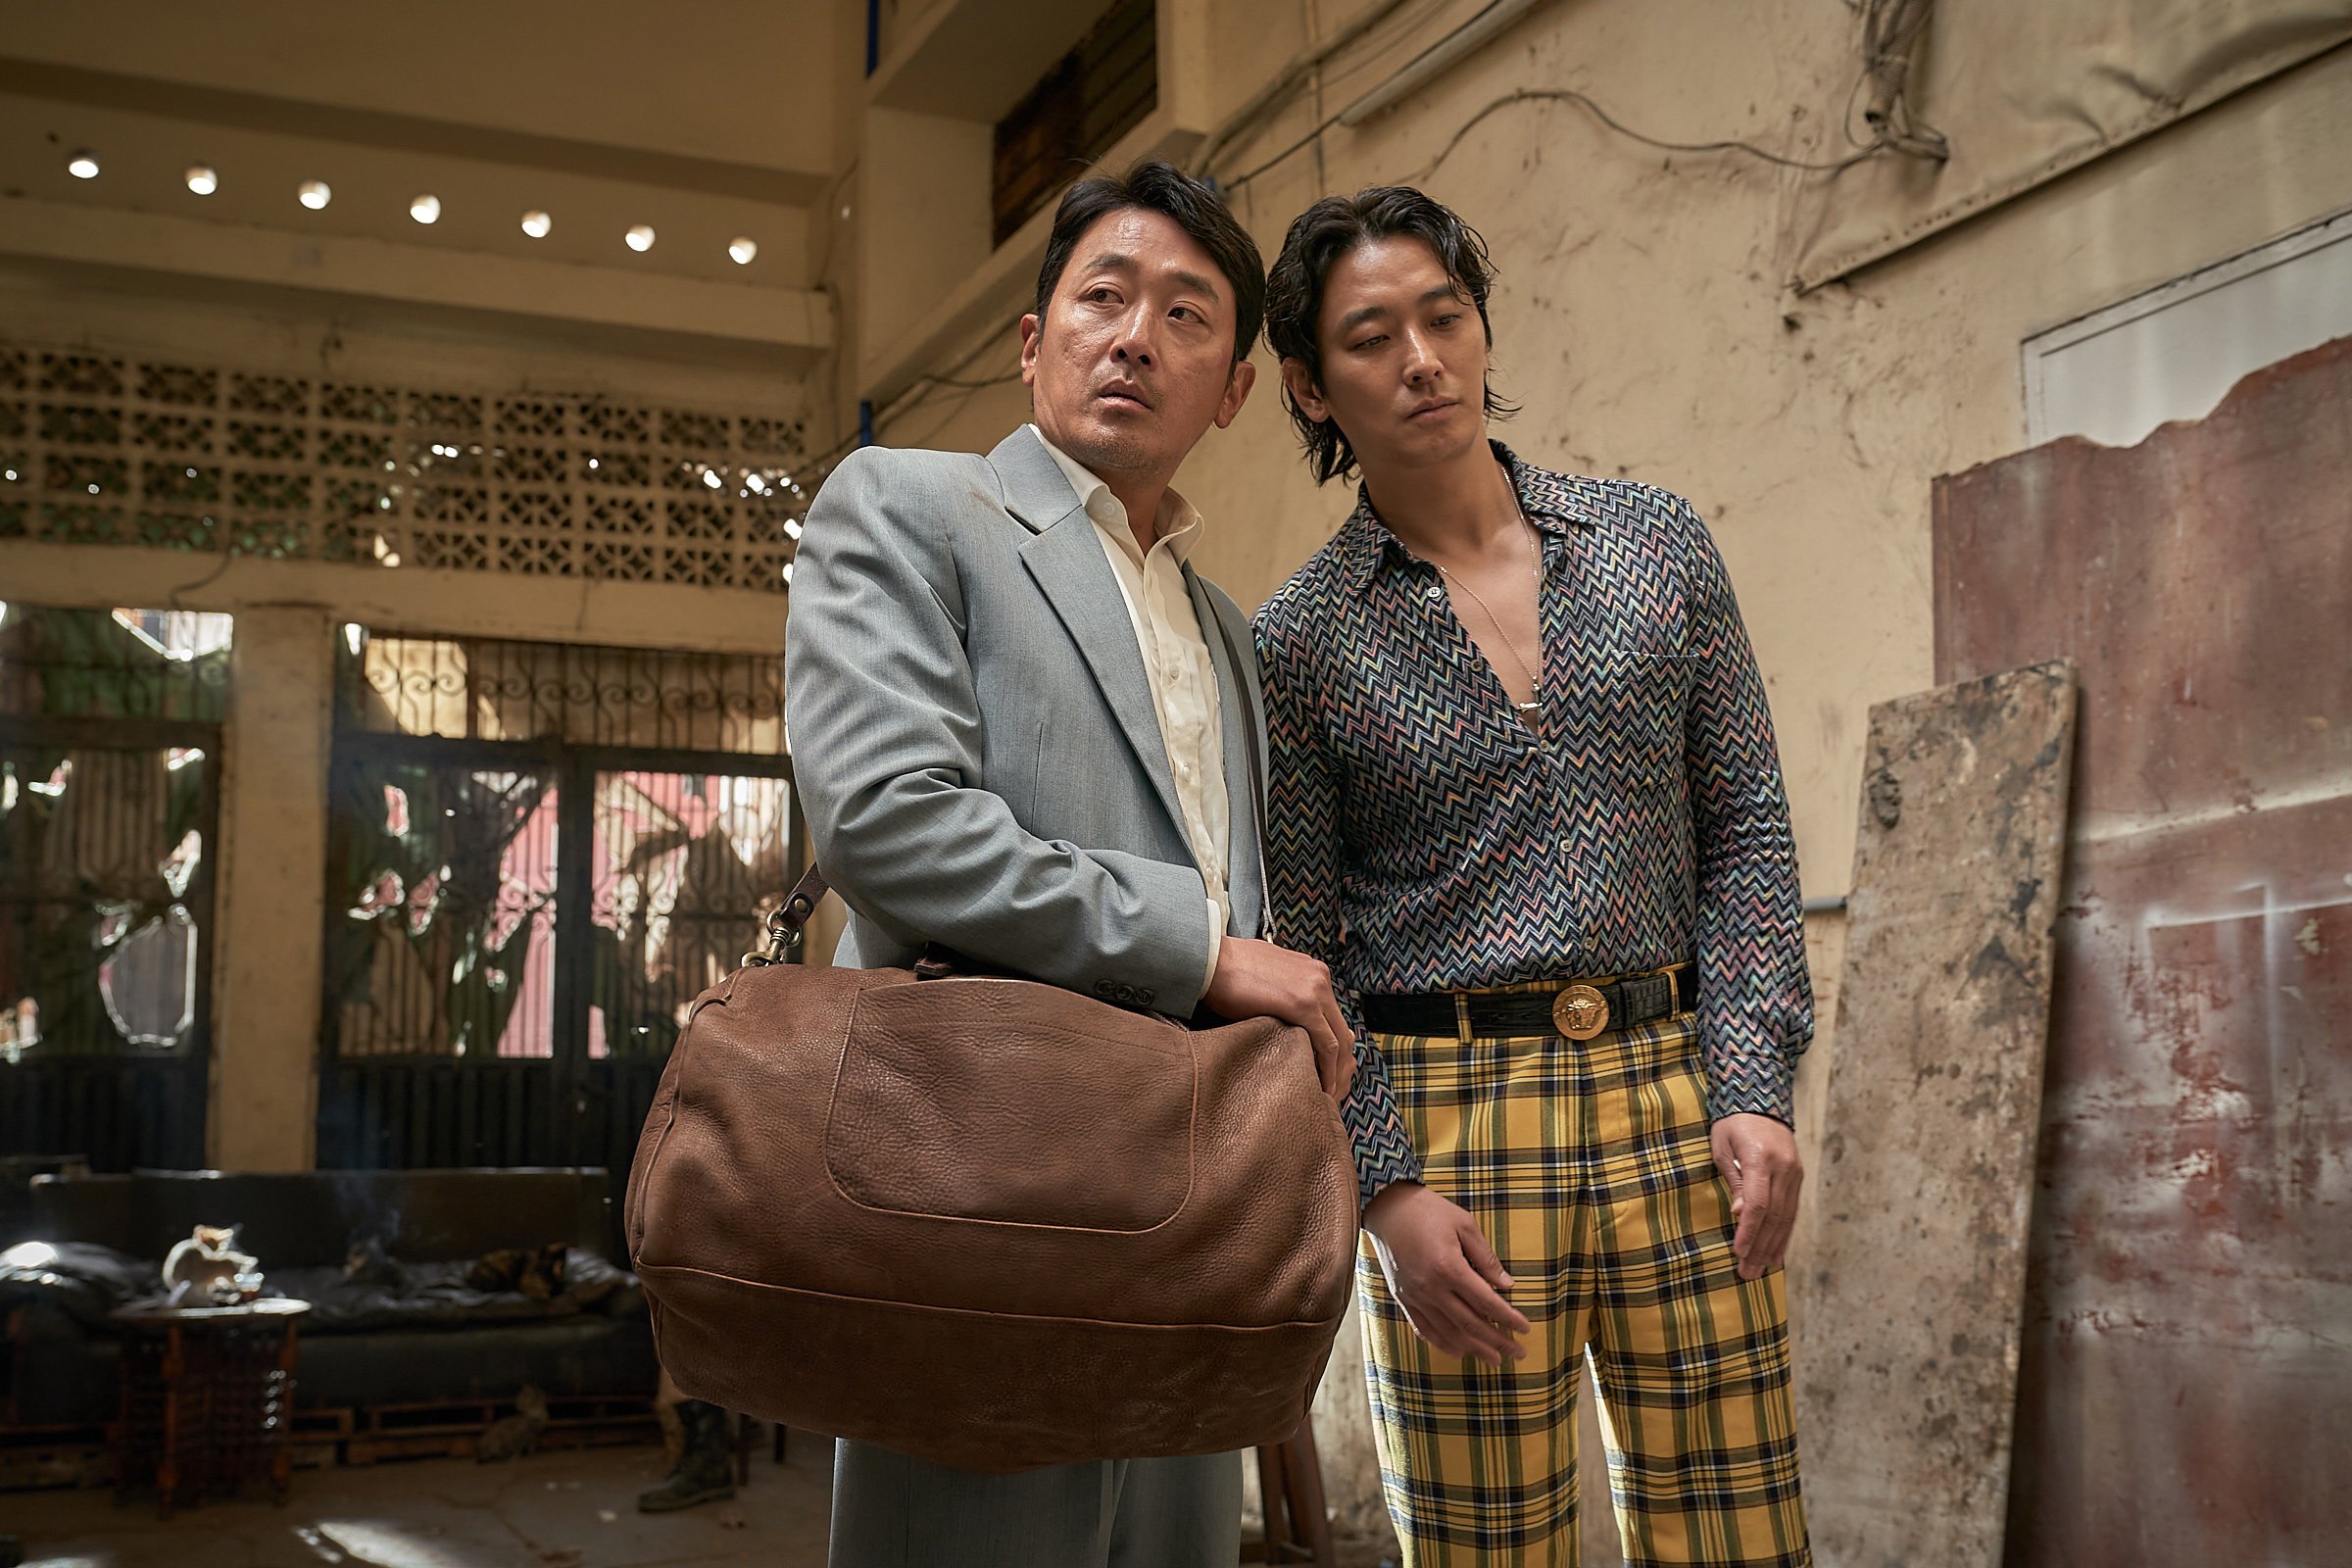 Ha Jung-woo (left) and Ju Ji-hoon in a still from “Ransomed”.